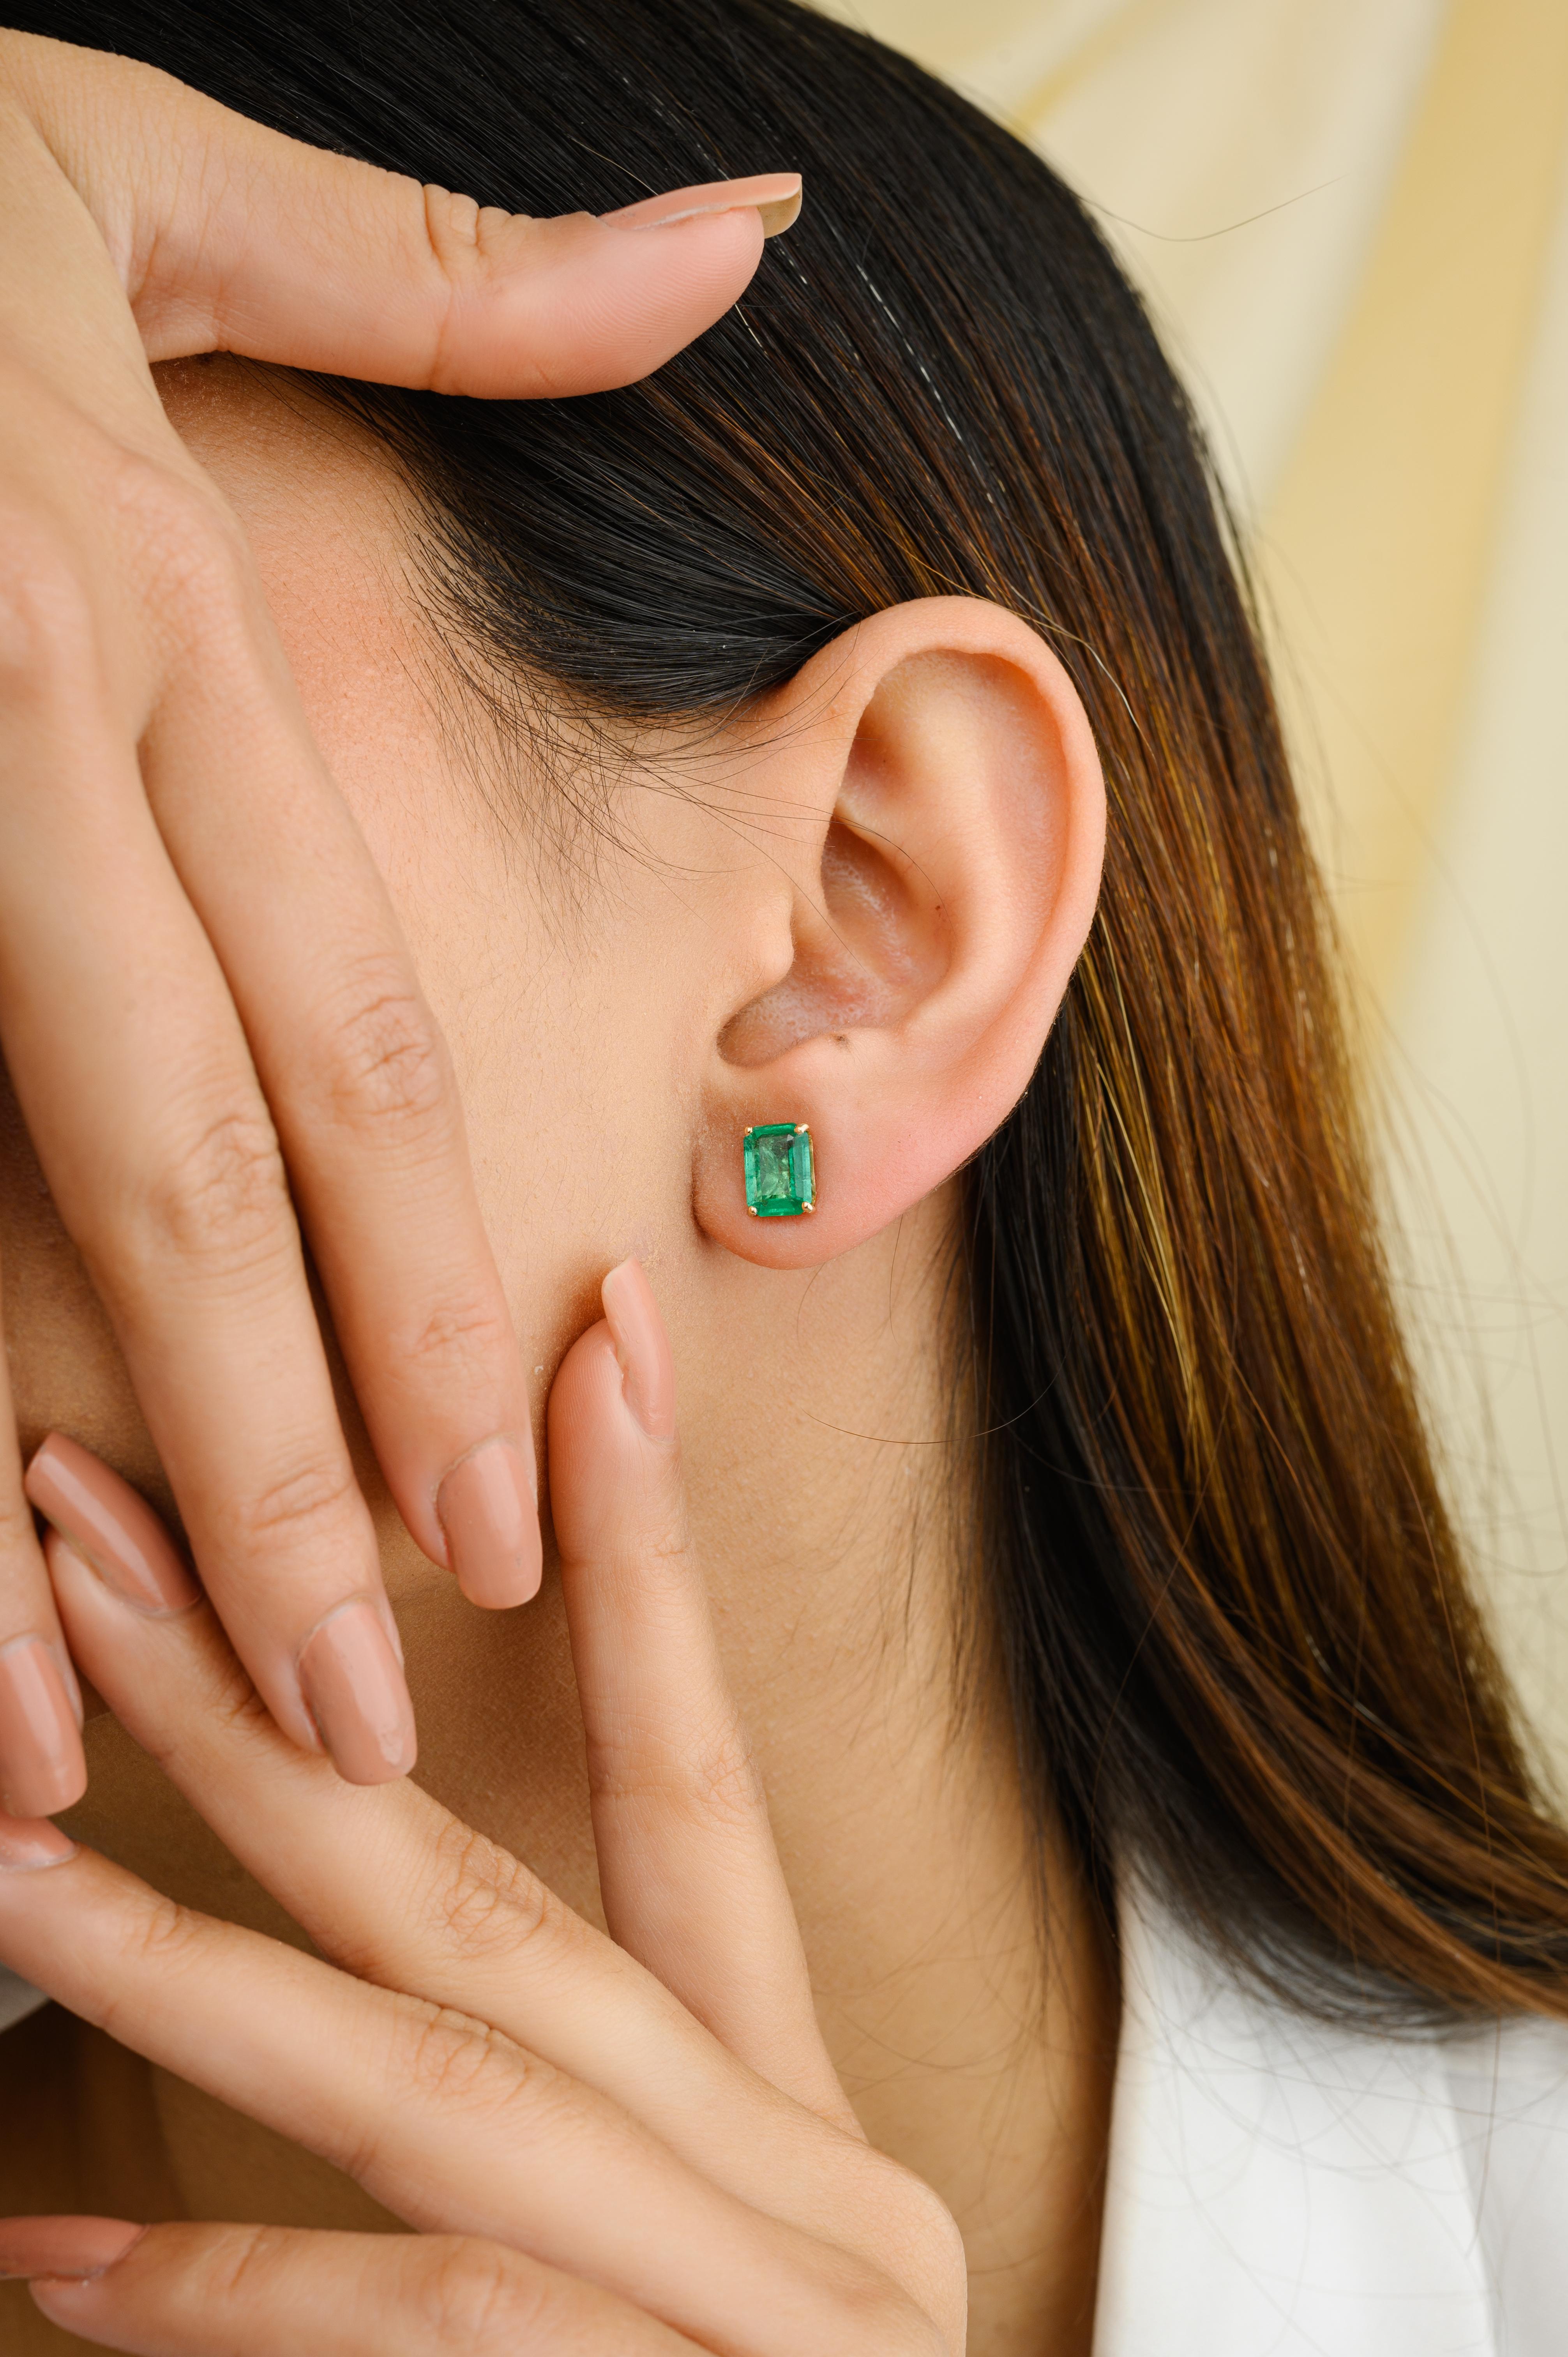 Natural Solitaire Emerald Stud Earrings in 18K Gold to make a statement with your look. You shall need studs earring to make a statement with your look. These earrings create a sparkling, luxurious look featuring octagon cut emerald.
Emerald